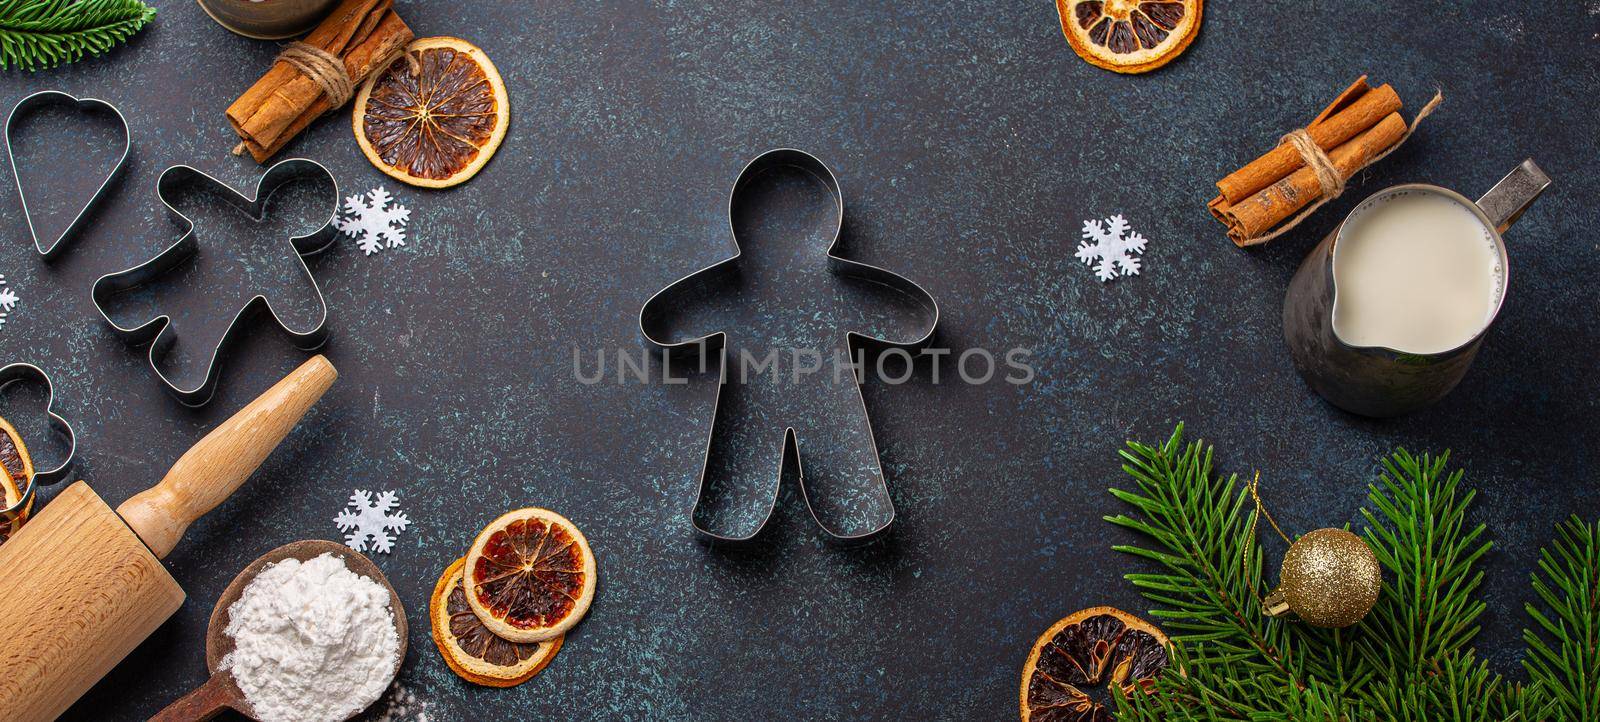 Christmas and New Year baking composition with kitchen tools, flour, milk, balls, fir tree and gingerbread man cutter in center on dark blue stone concrete background table top view